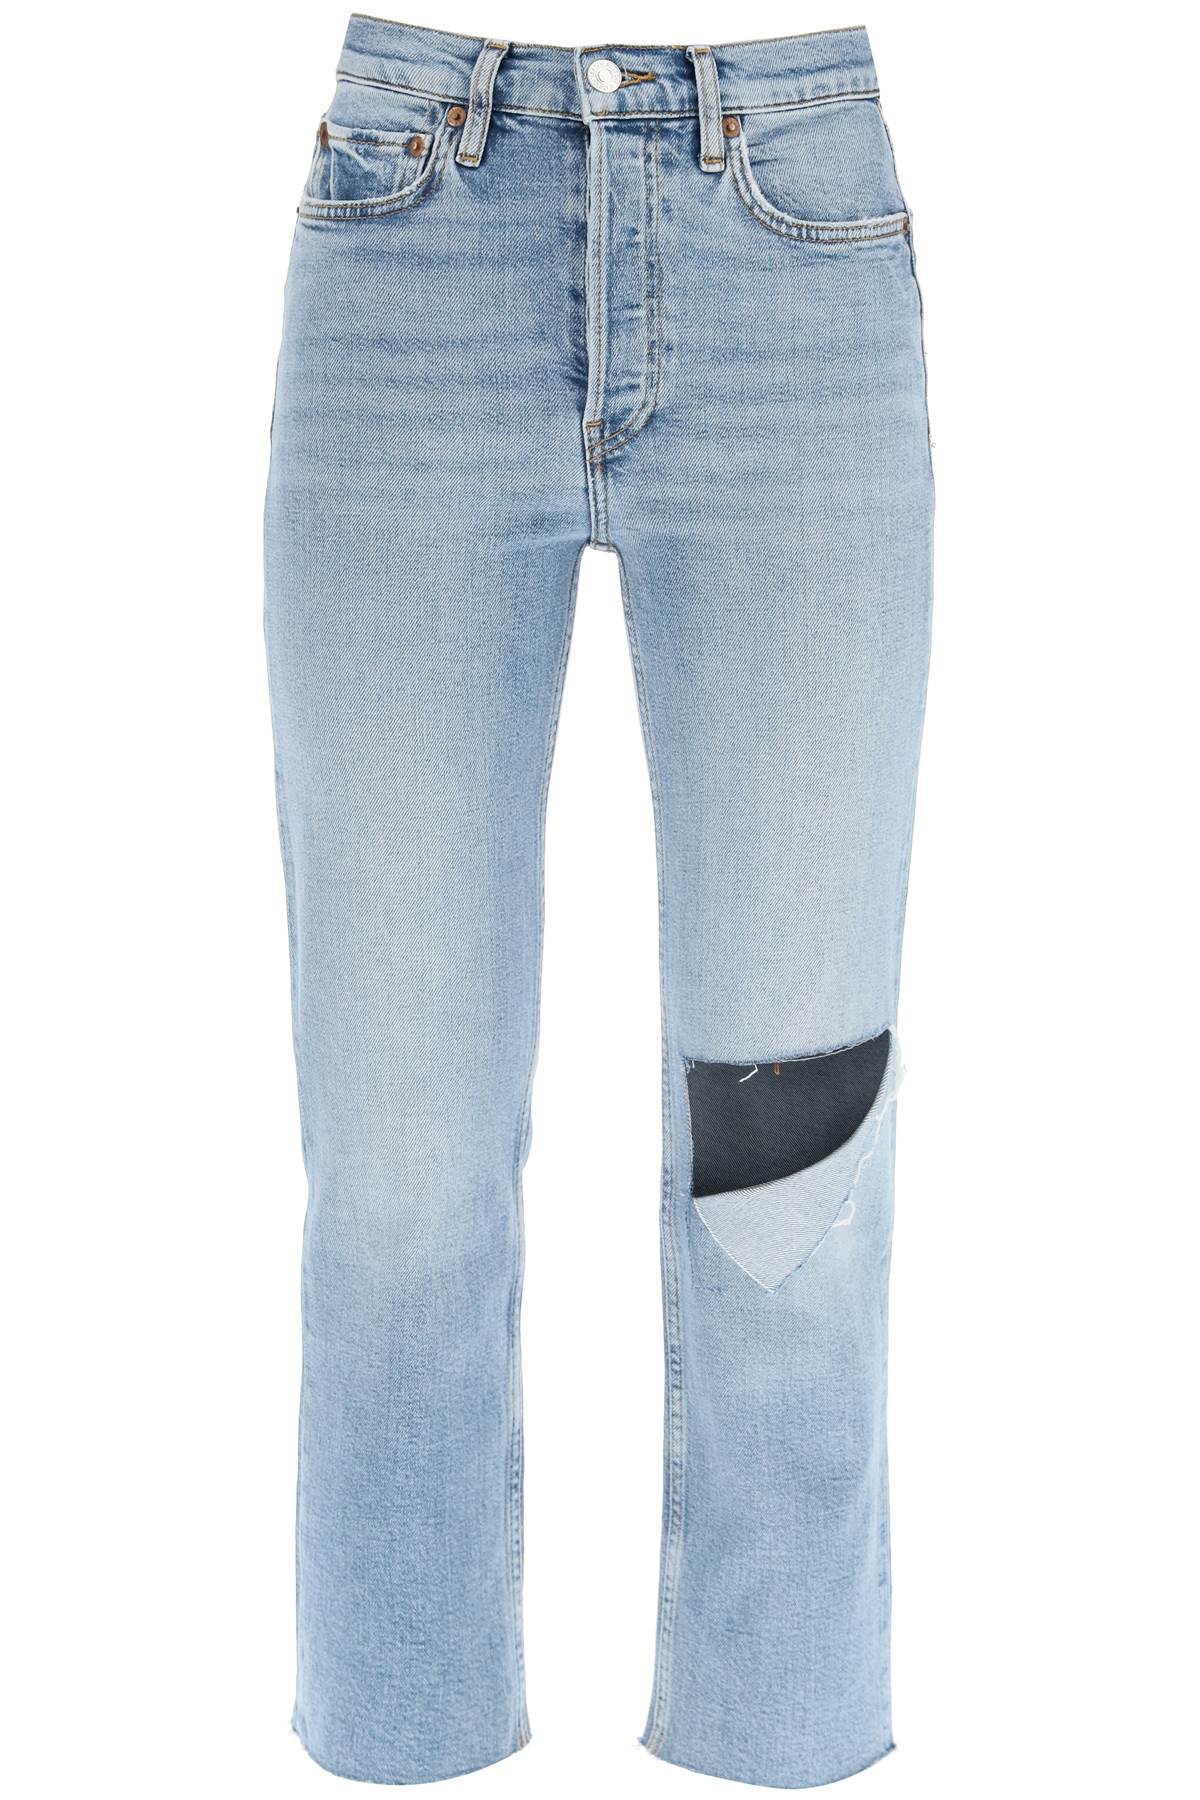 RE/DONE High Rise Stove Pipe Jeans With Rips